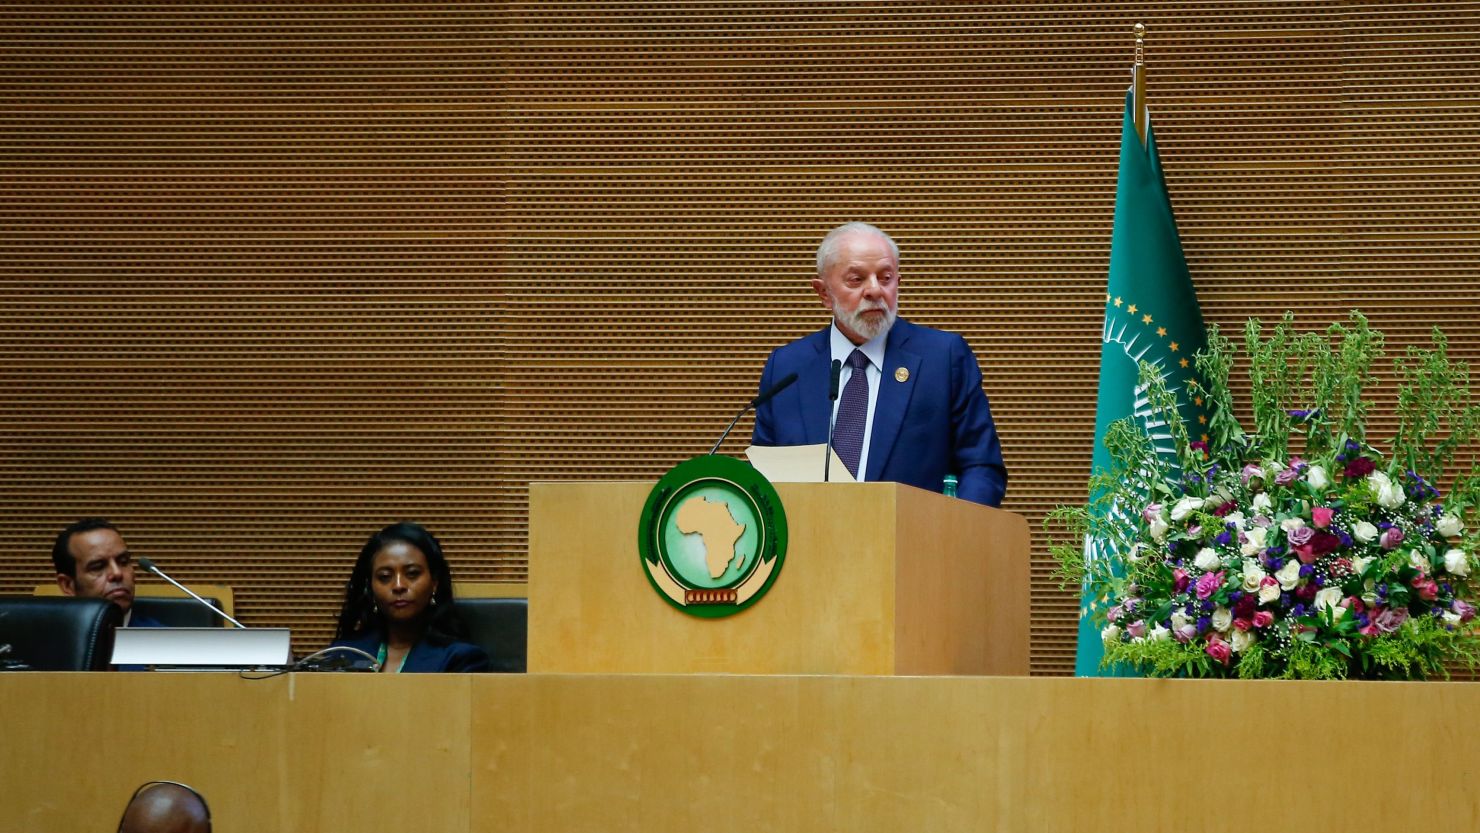 Brazil's President Luiz Inacio Lula da Silva addresses African heads of state on Saturday during the 37th Ordinary Session of the Assembly of the Heads of State in Addis Ababa, Ethiopia.